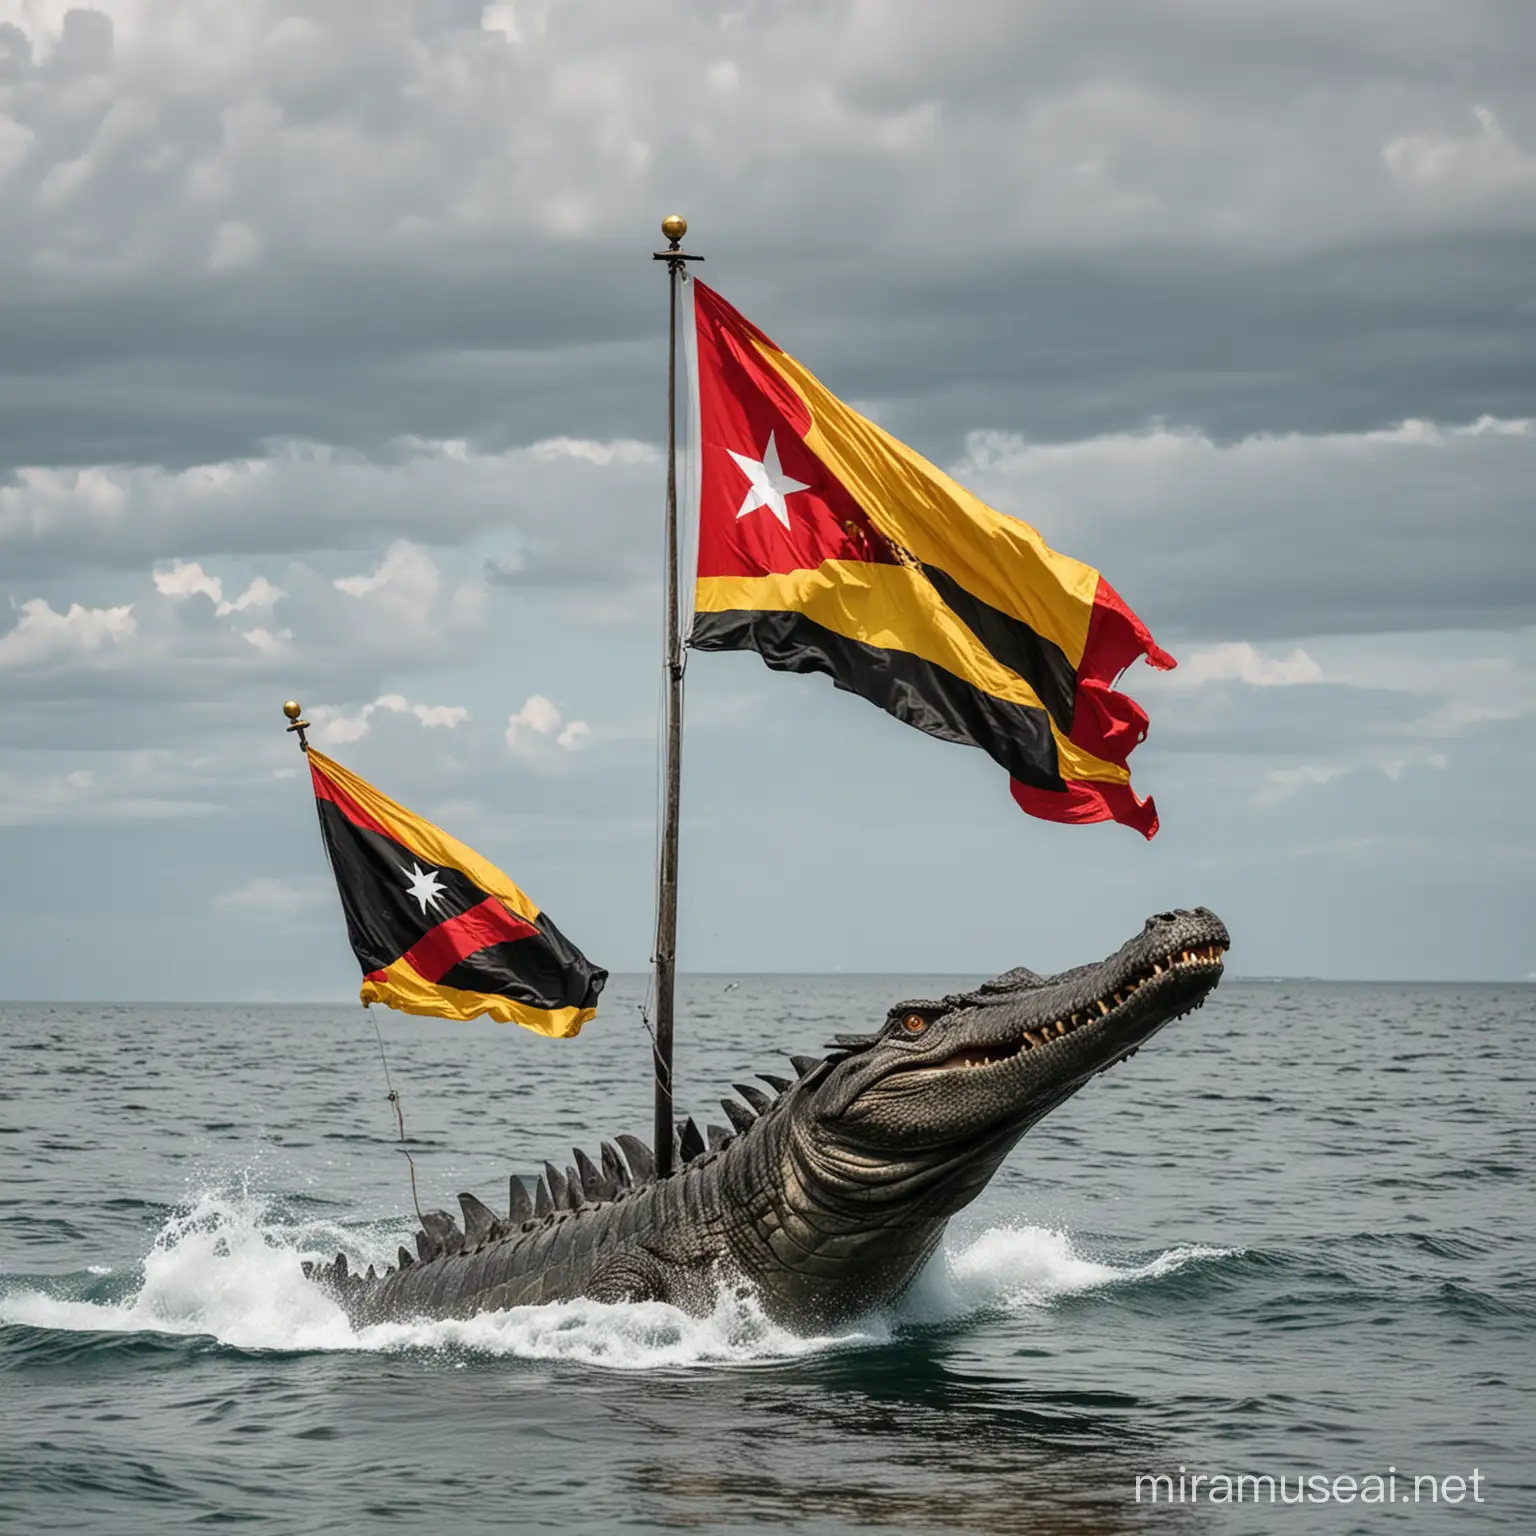 East timor flag flying on top of the sea with wings and crocodile like iconic figures